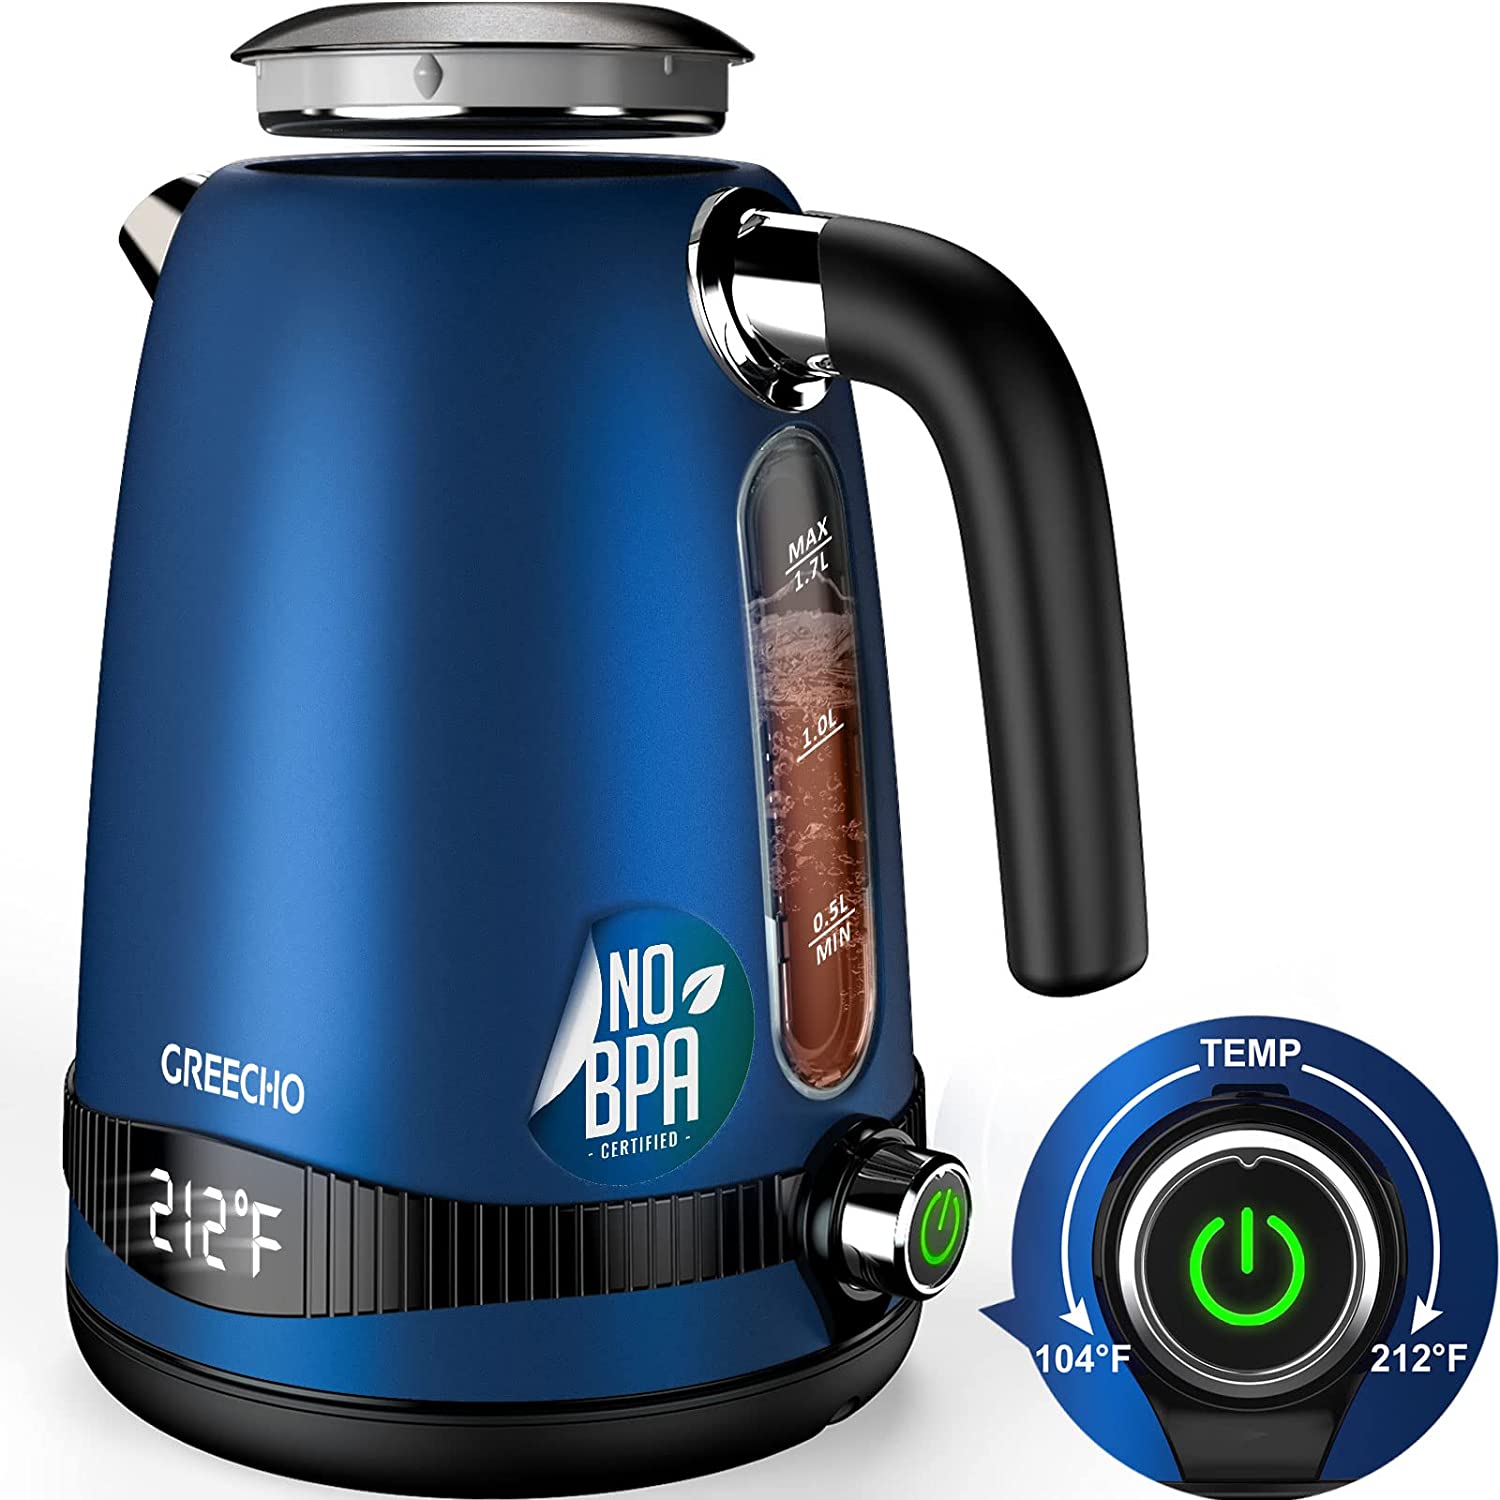 https://www.dontwasteyourmoney.com/wp-content/uploads/2021/09/greecho-bpa-free-electric-kettle-for-coffee.jpg